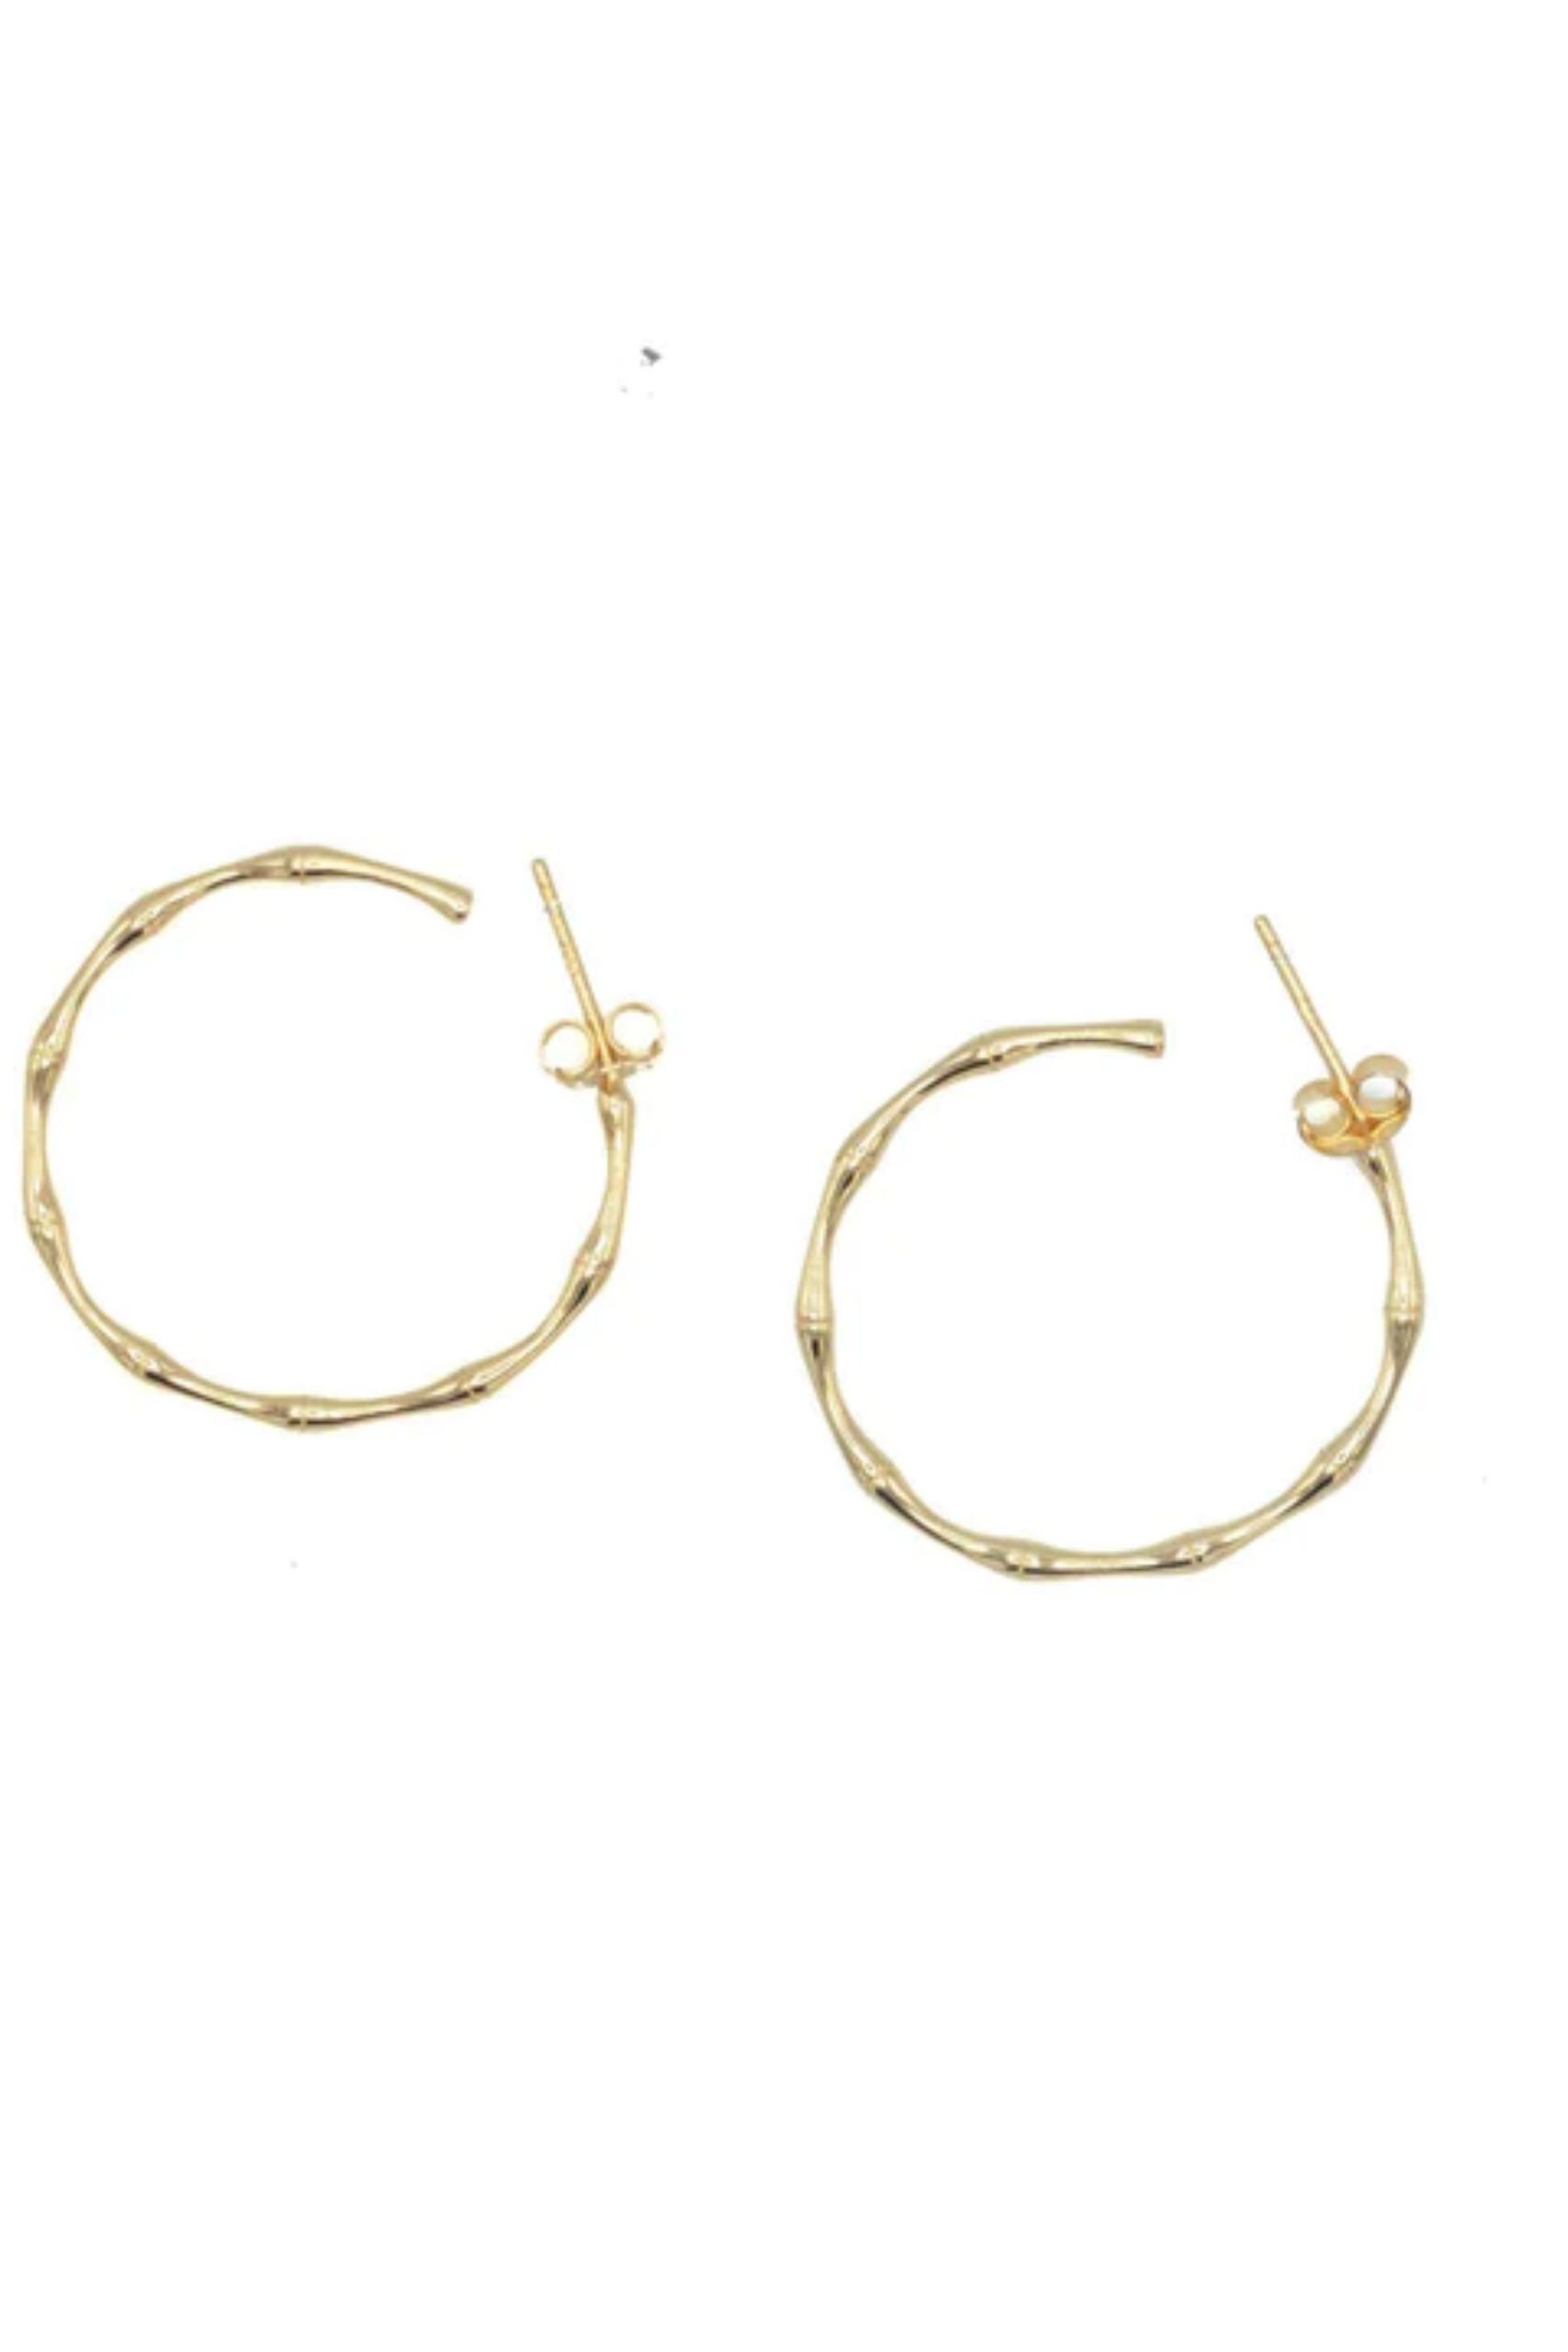 Bamboo Hoops - The Design Collective Store